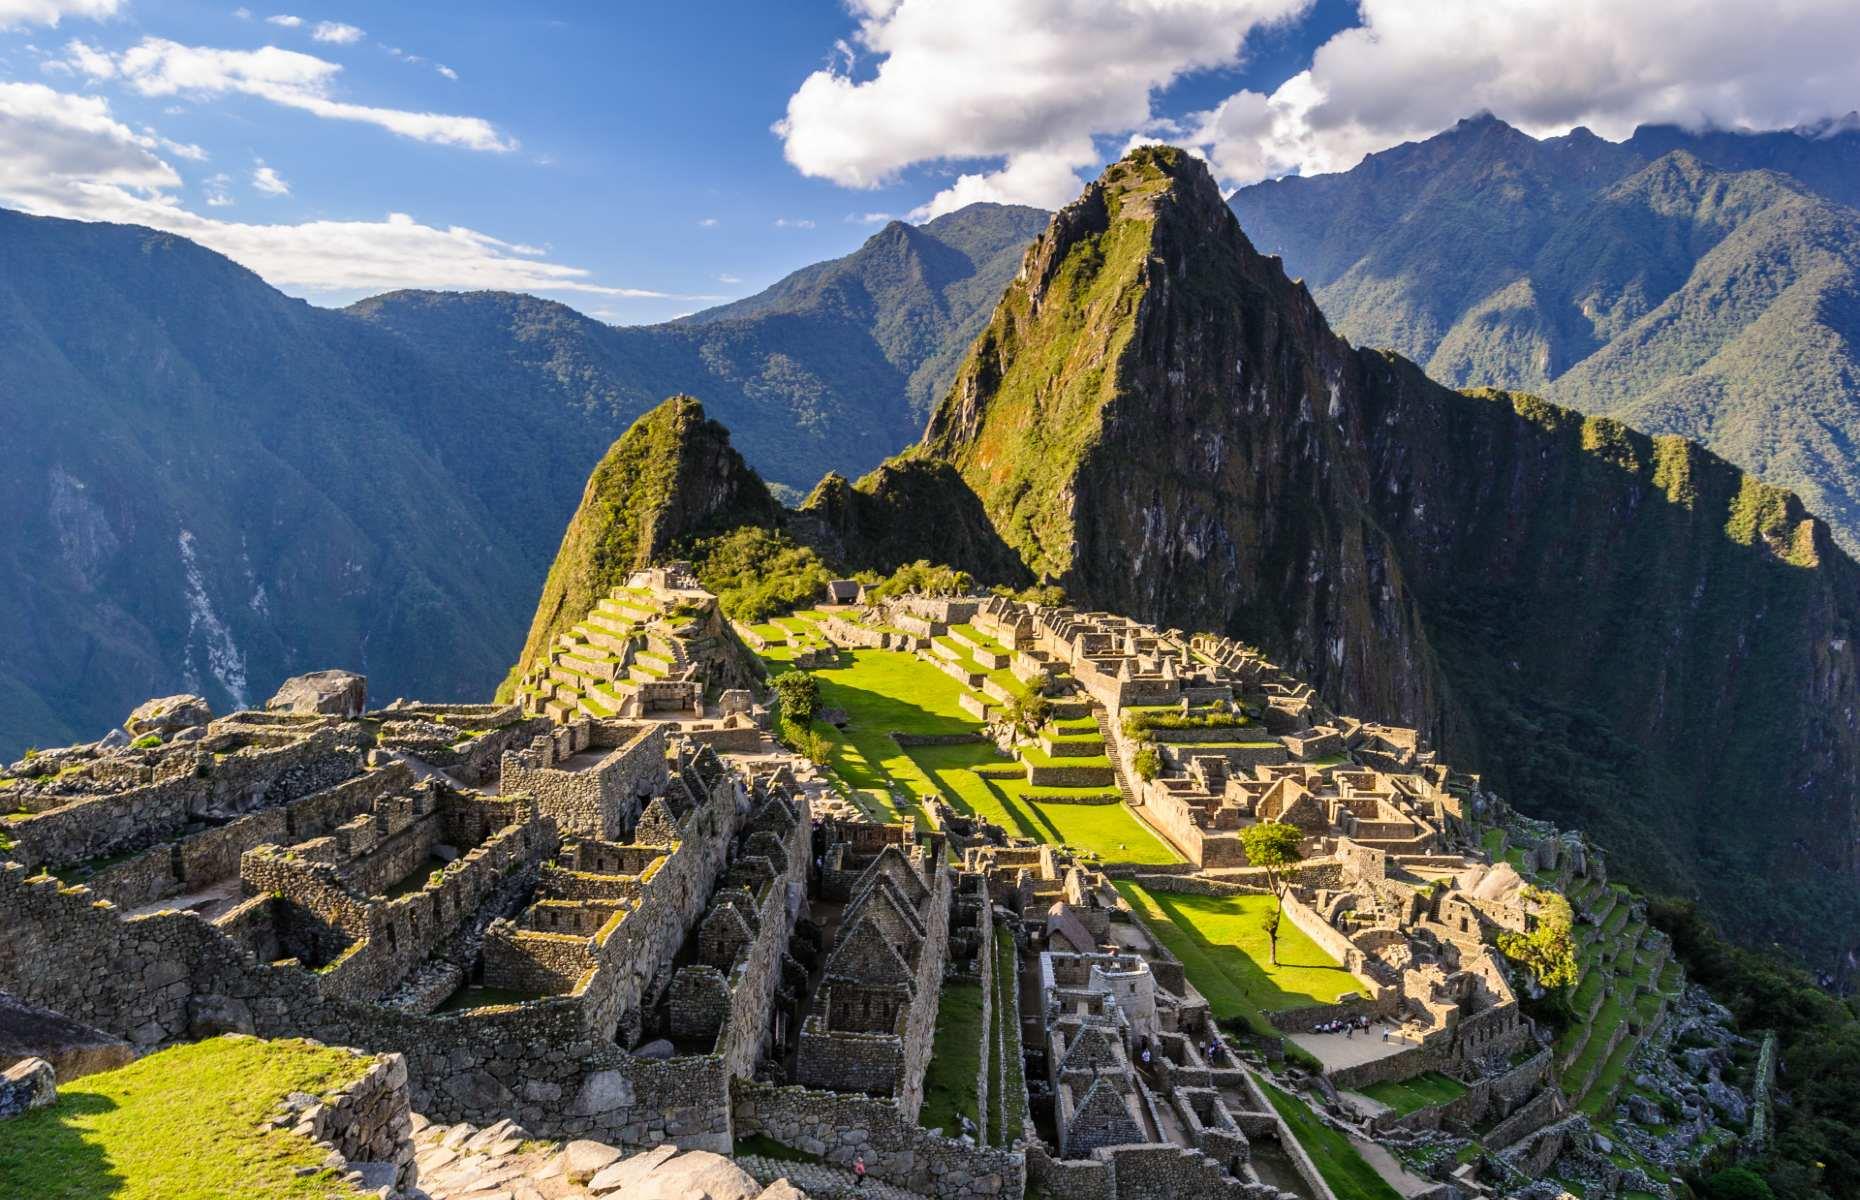 Considered South America’s most significant archaeological site, Machu Picchu astounds all who visit. It's thought that the emperor Pachacutec built the soaring 'Citadel in the Clouds' in the 15th century. The Inca city is the last stop on the four-day Inca Trail hike, but it can also be visited from Cusco: hop aboard the train to Aguas Caliente and enjoy some spectacular scenery on the three-and-a-half hour journey, which winds its way through verdant rainforests.